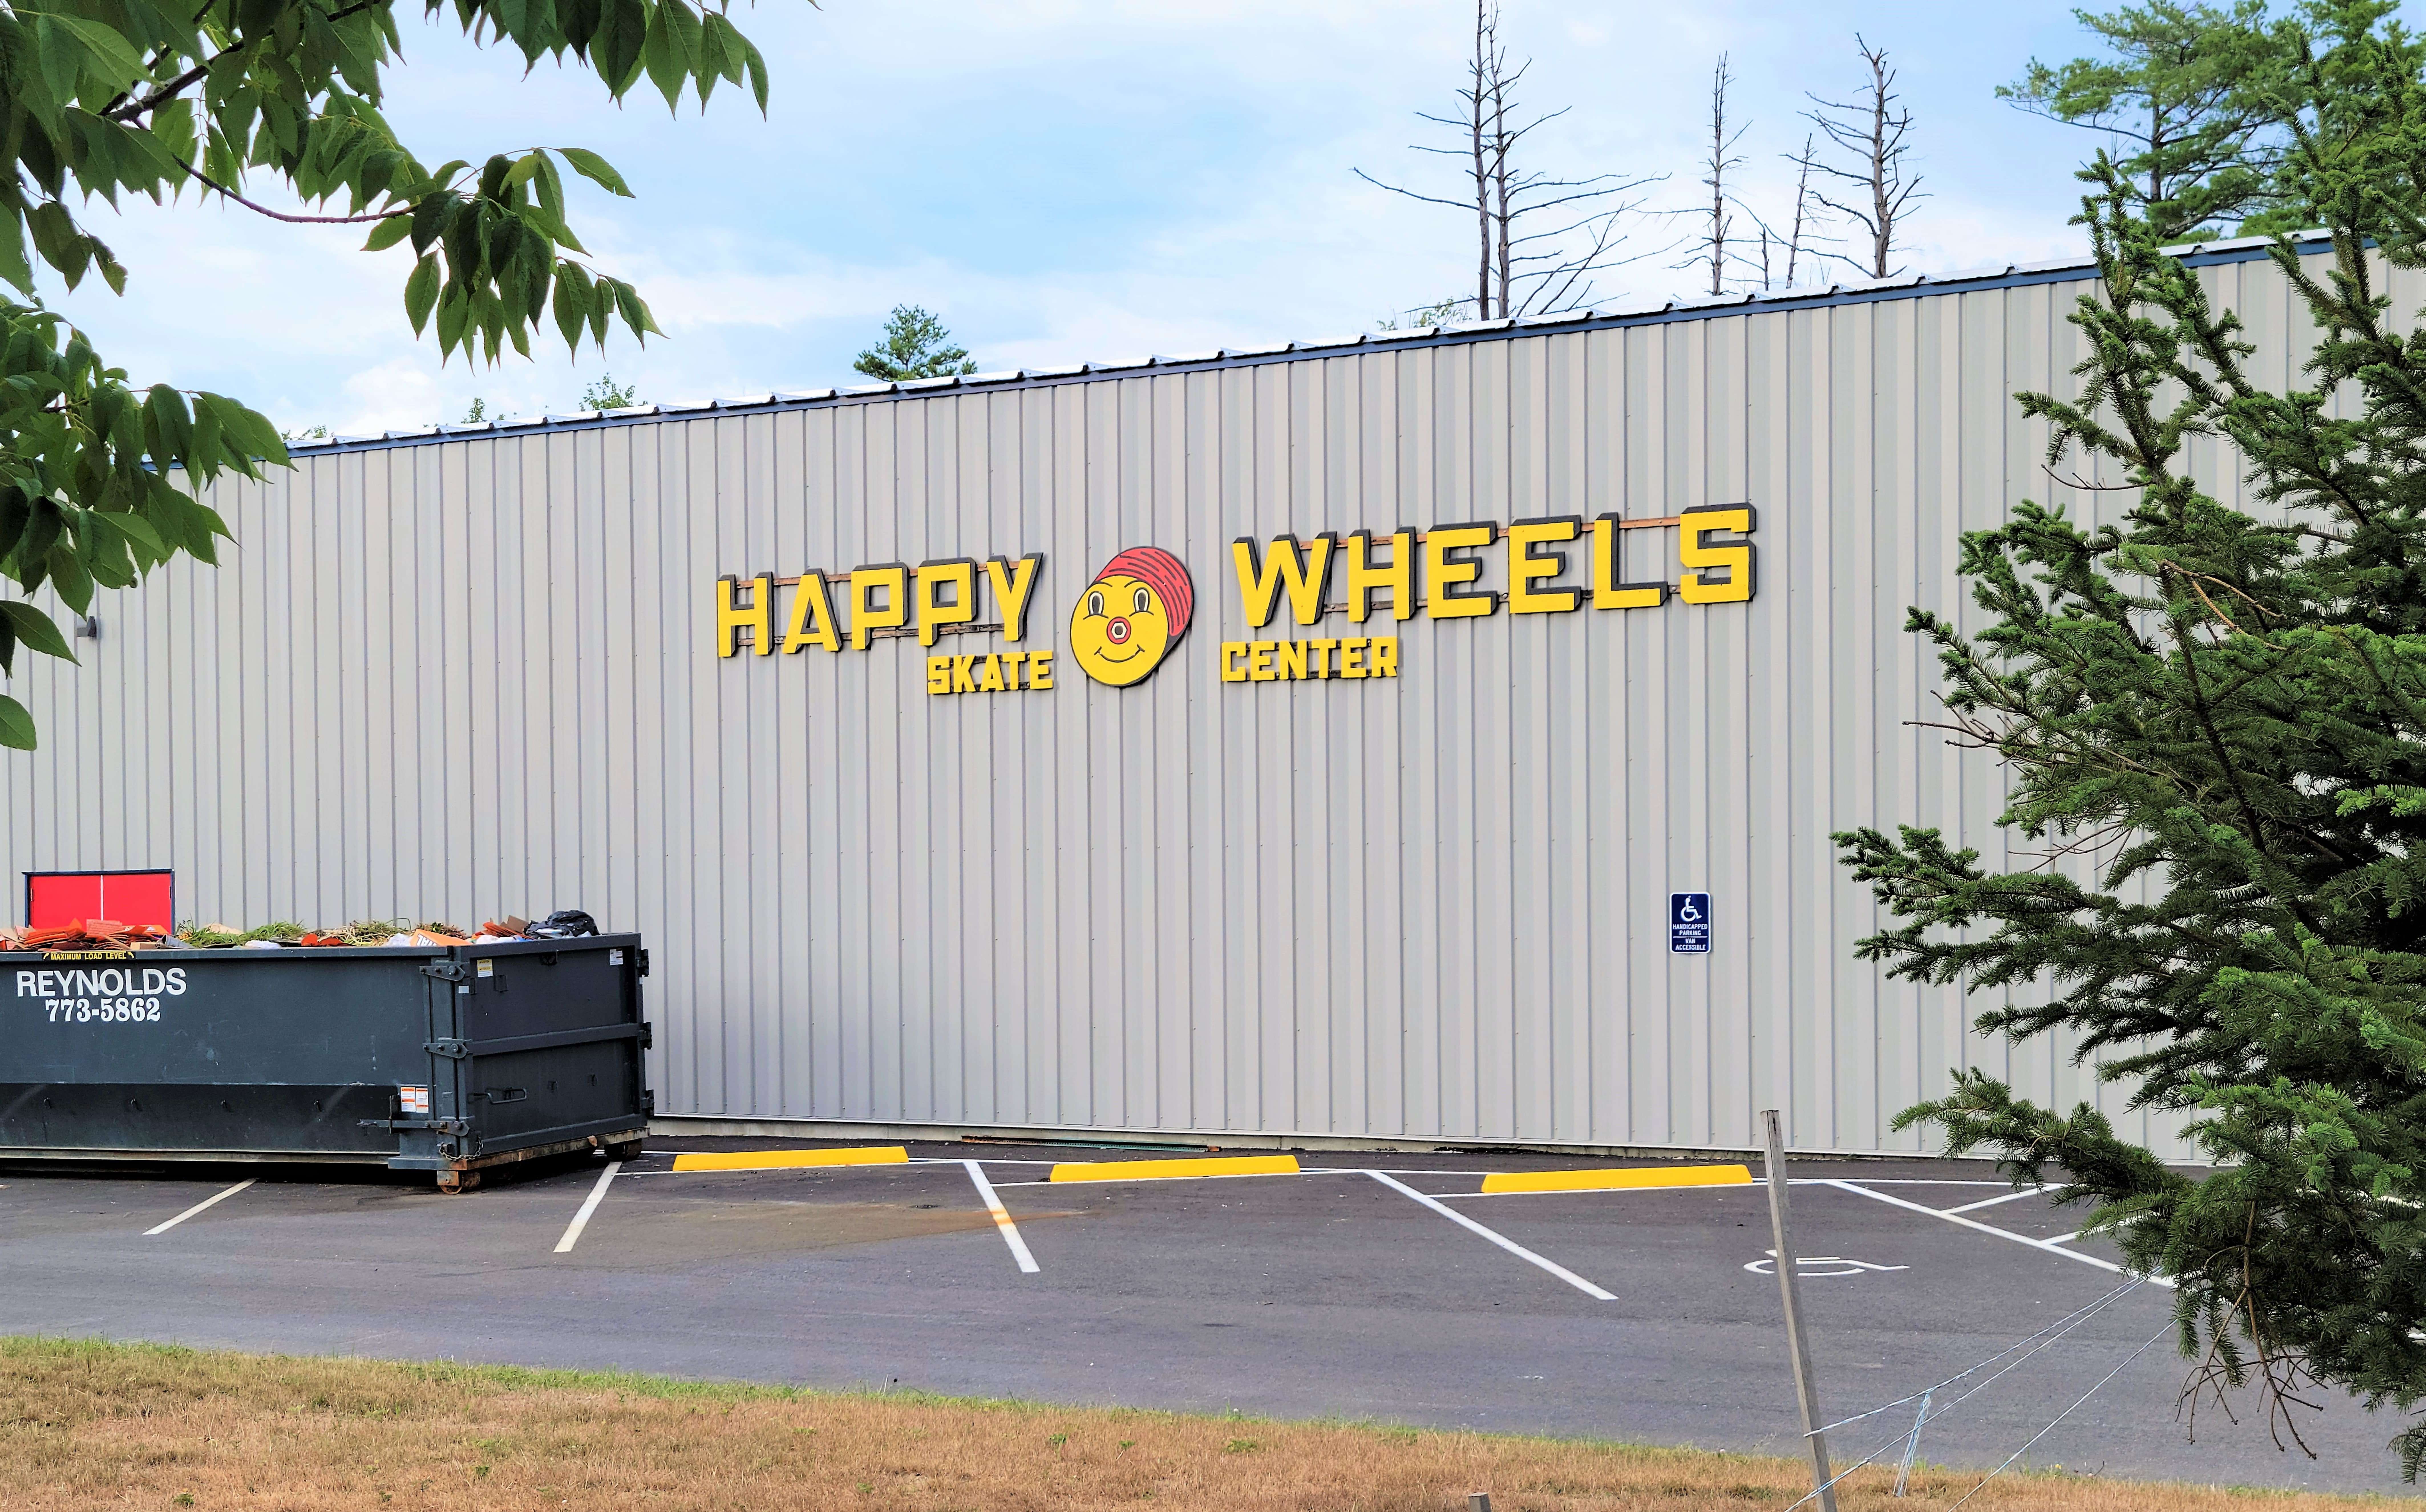 gray, industrial building with "Happy Wheels" sign